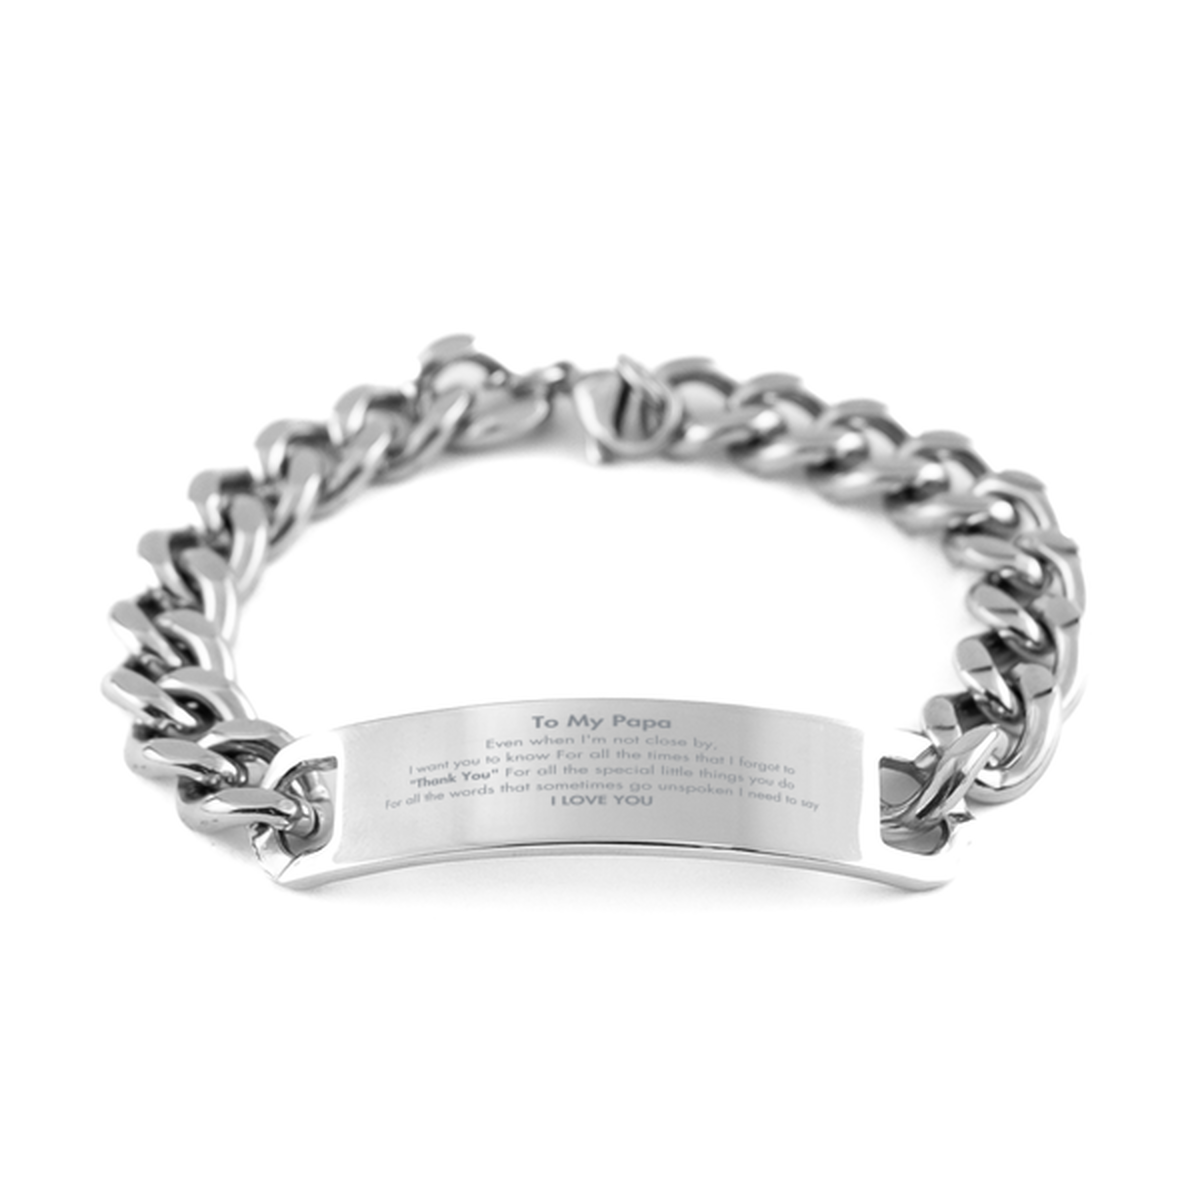 Thank You Gifts for Papa, Keepsake Cuban Chain Stainless Steel Bracelet Gifts for Papa Birthday Mother's day Father's Day Papa For all the words That sometimes go unspoken I need to say I LOVE YOU